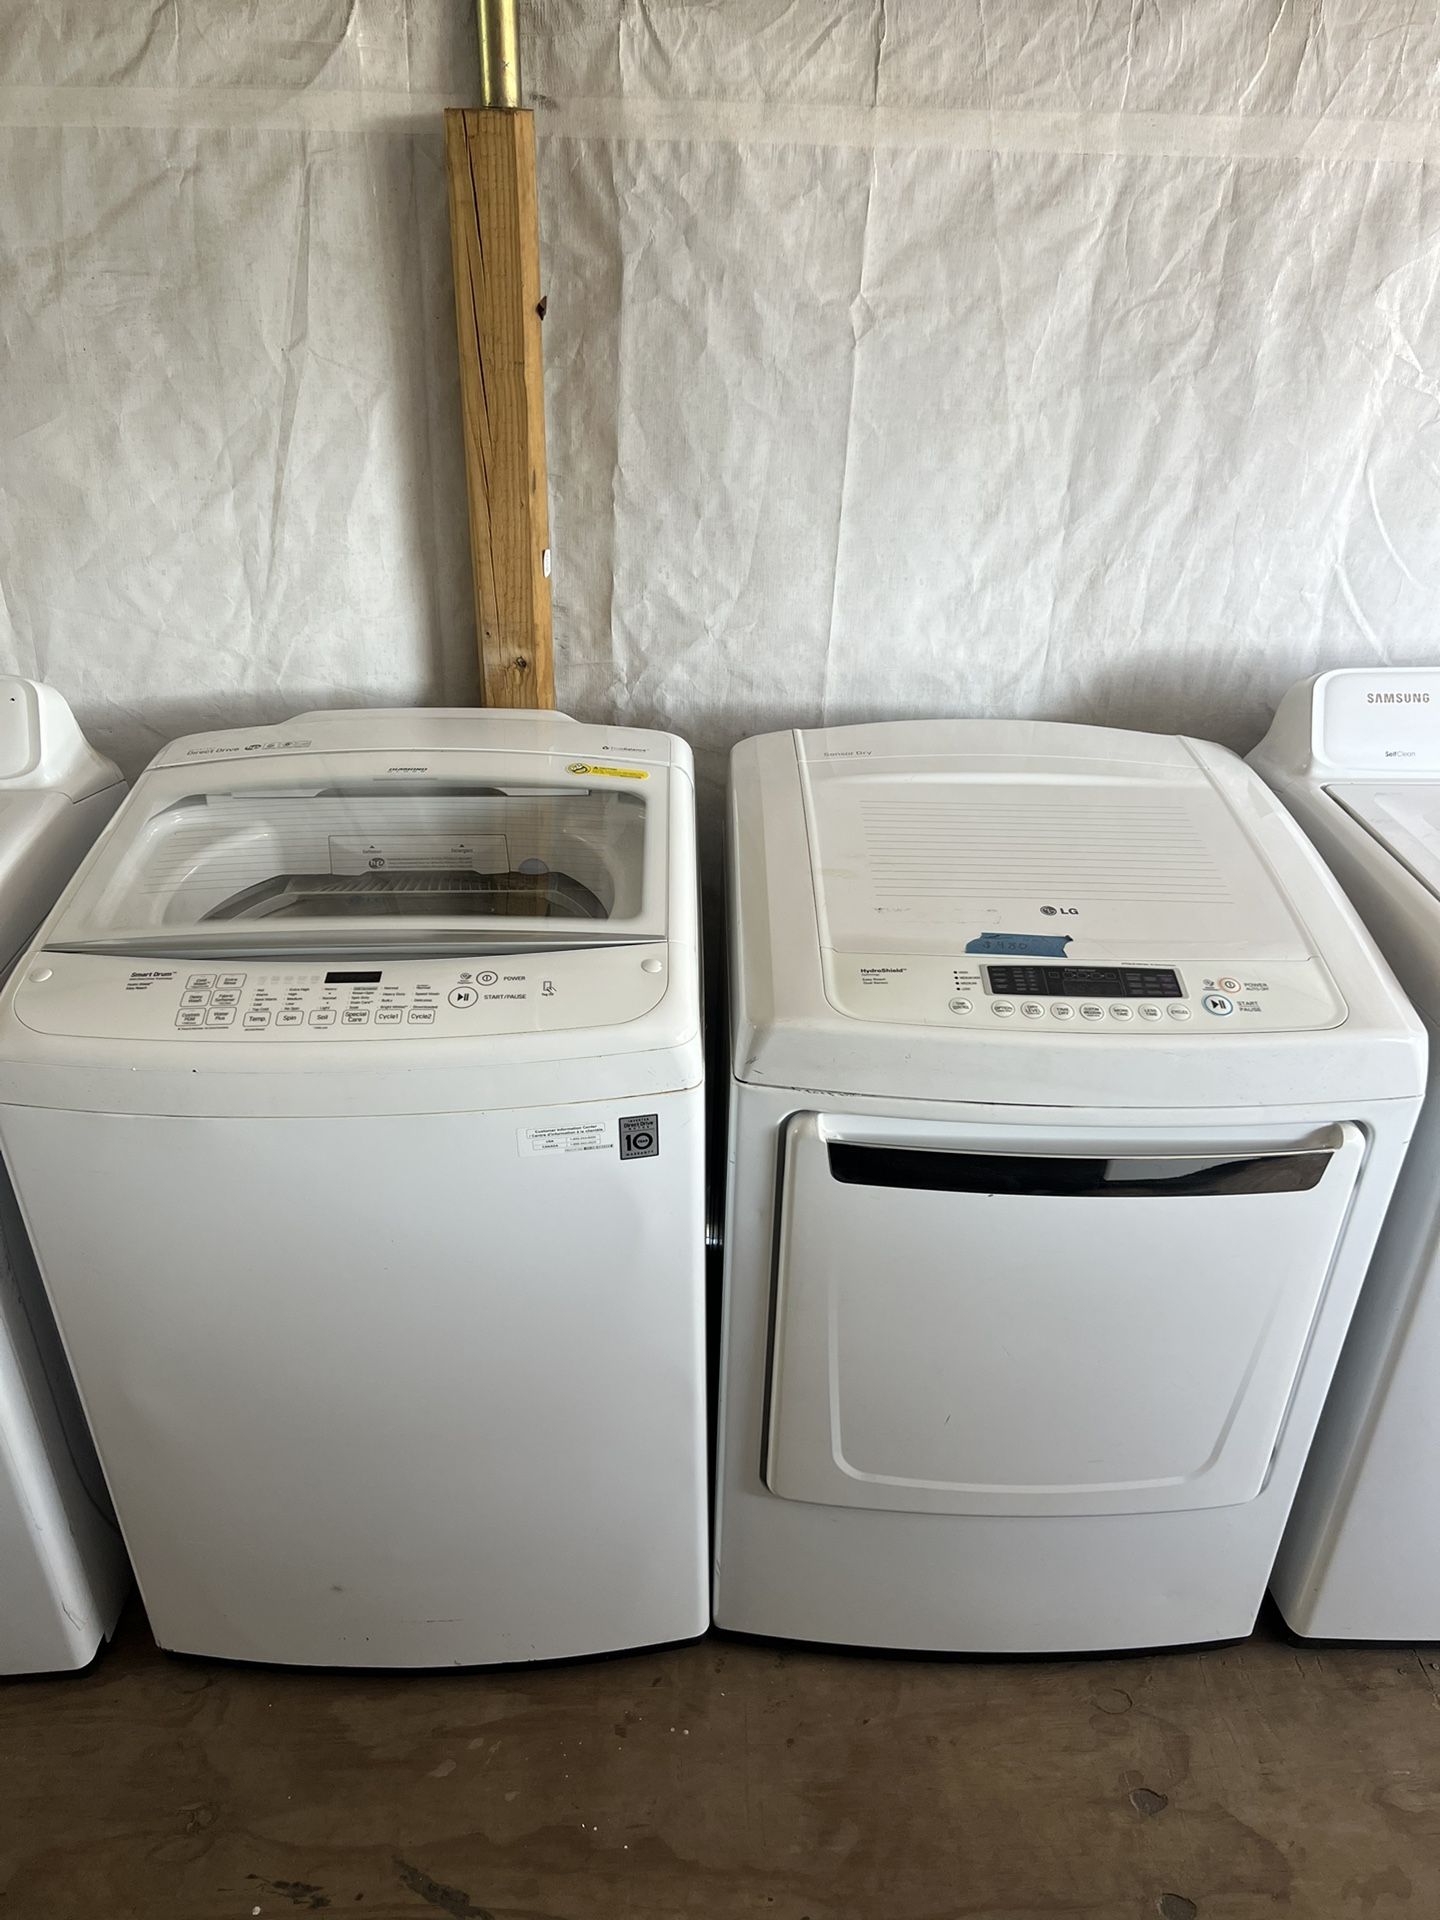 LG Washer&dryer Large Capacity Set   60 day warranty/ Located at:📍5415 Carmack Rd Tampa Fl 33610📍